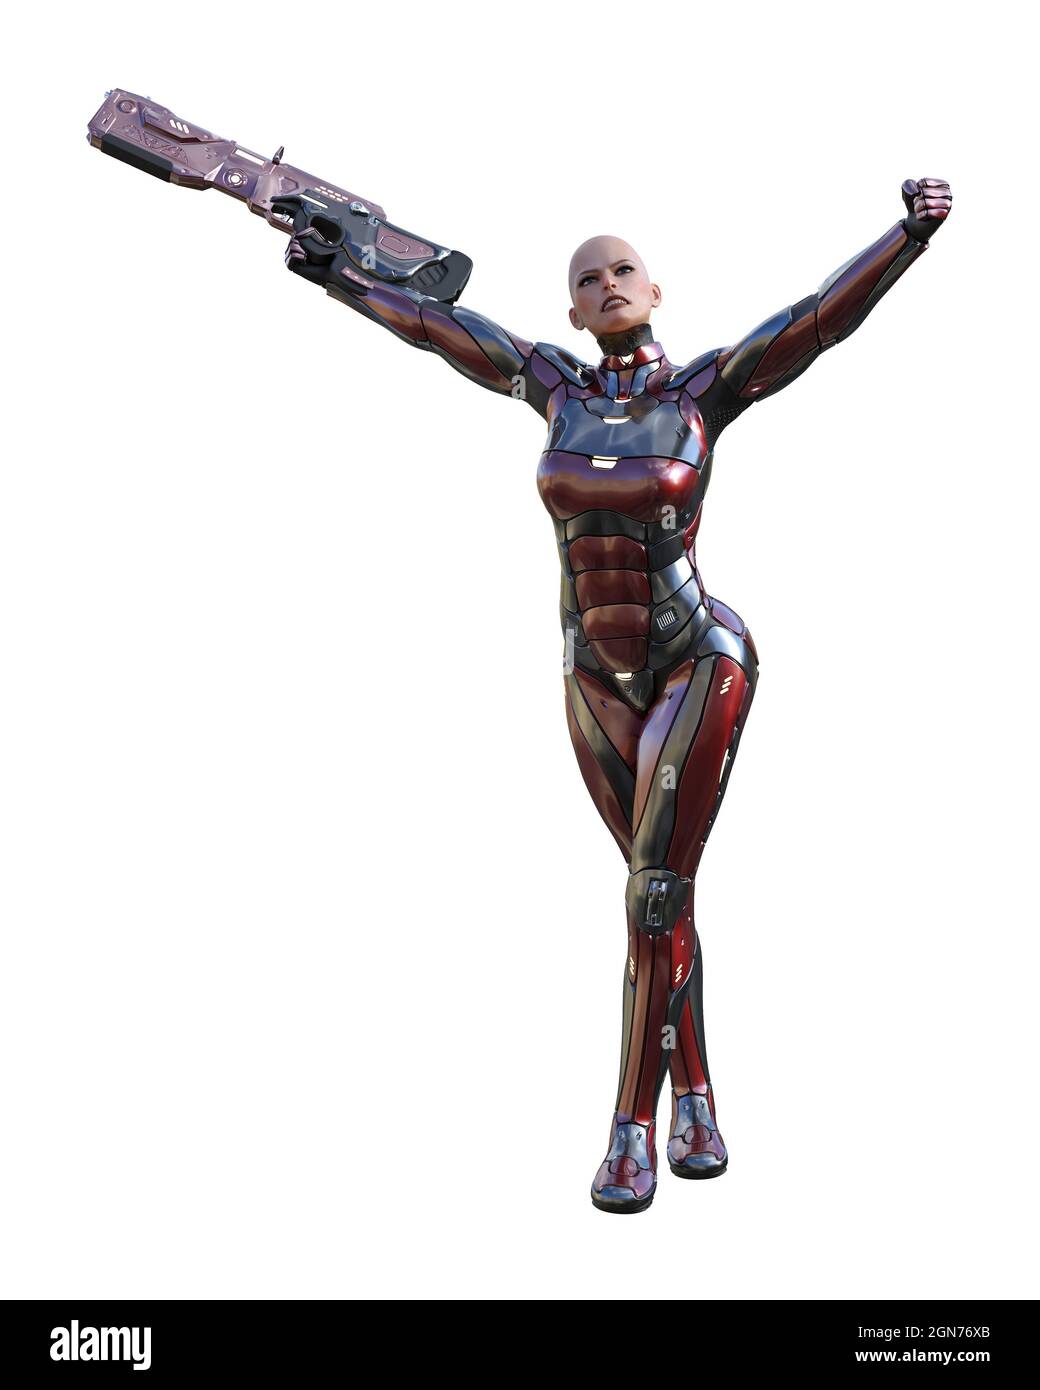 Woman science fiction armor Cut Out Stock Images & Pictures - Page